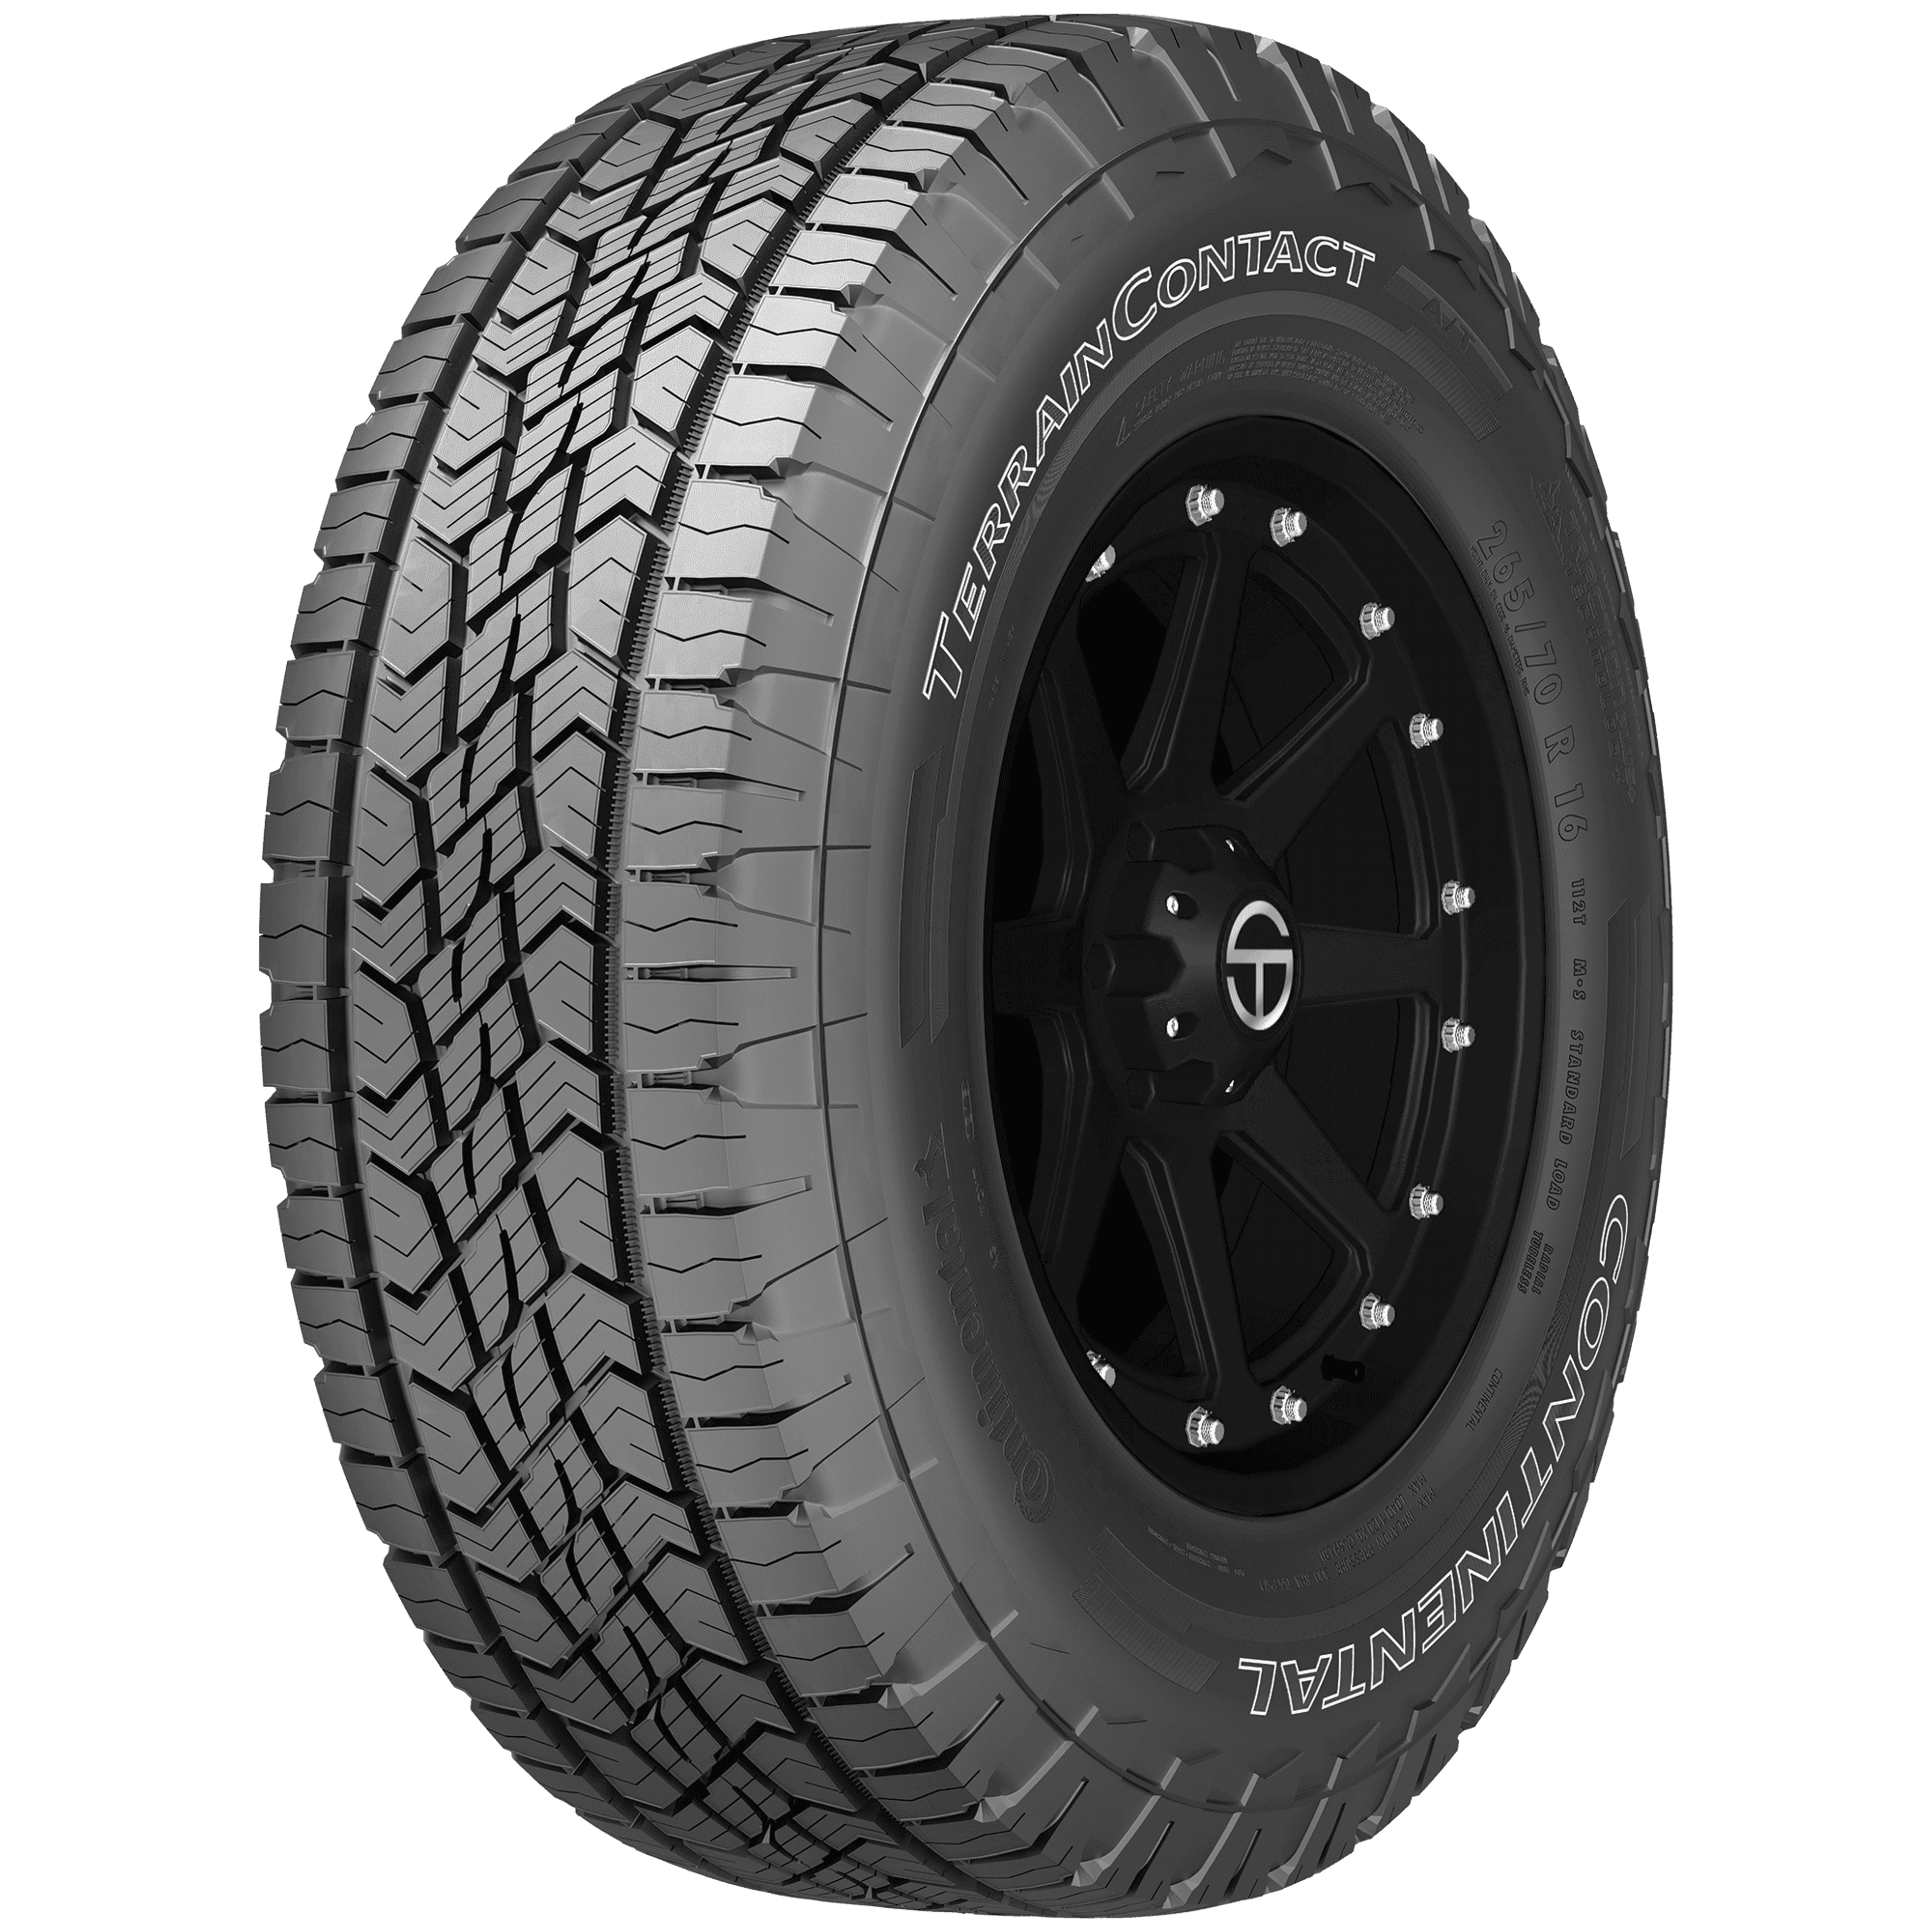 Buy Continental TerrainContact A/T Tires Online | SimpleTire